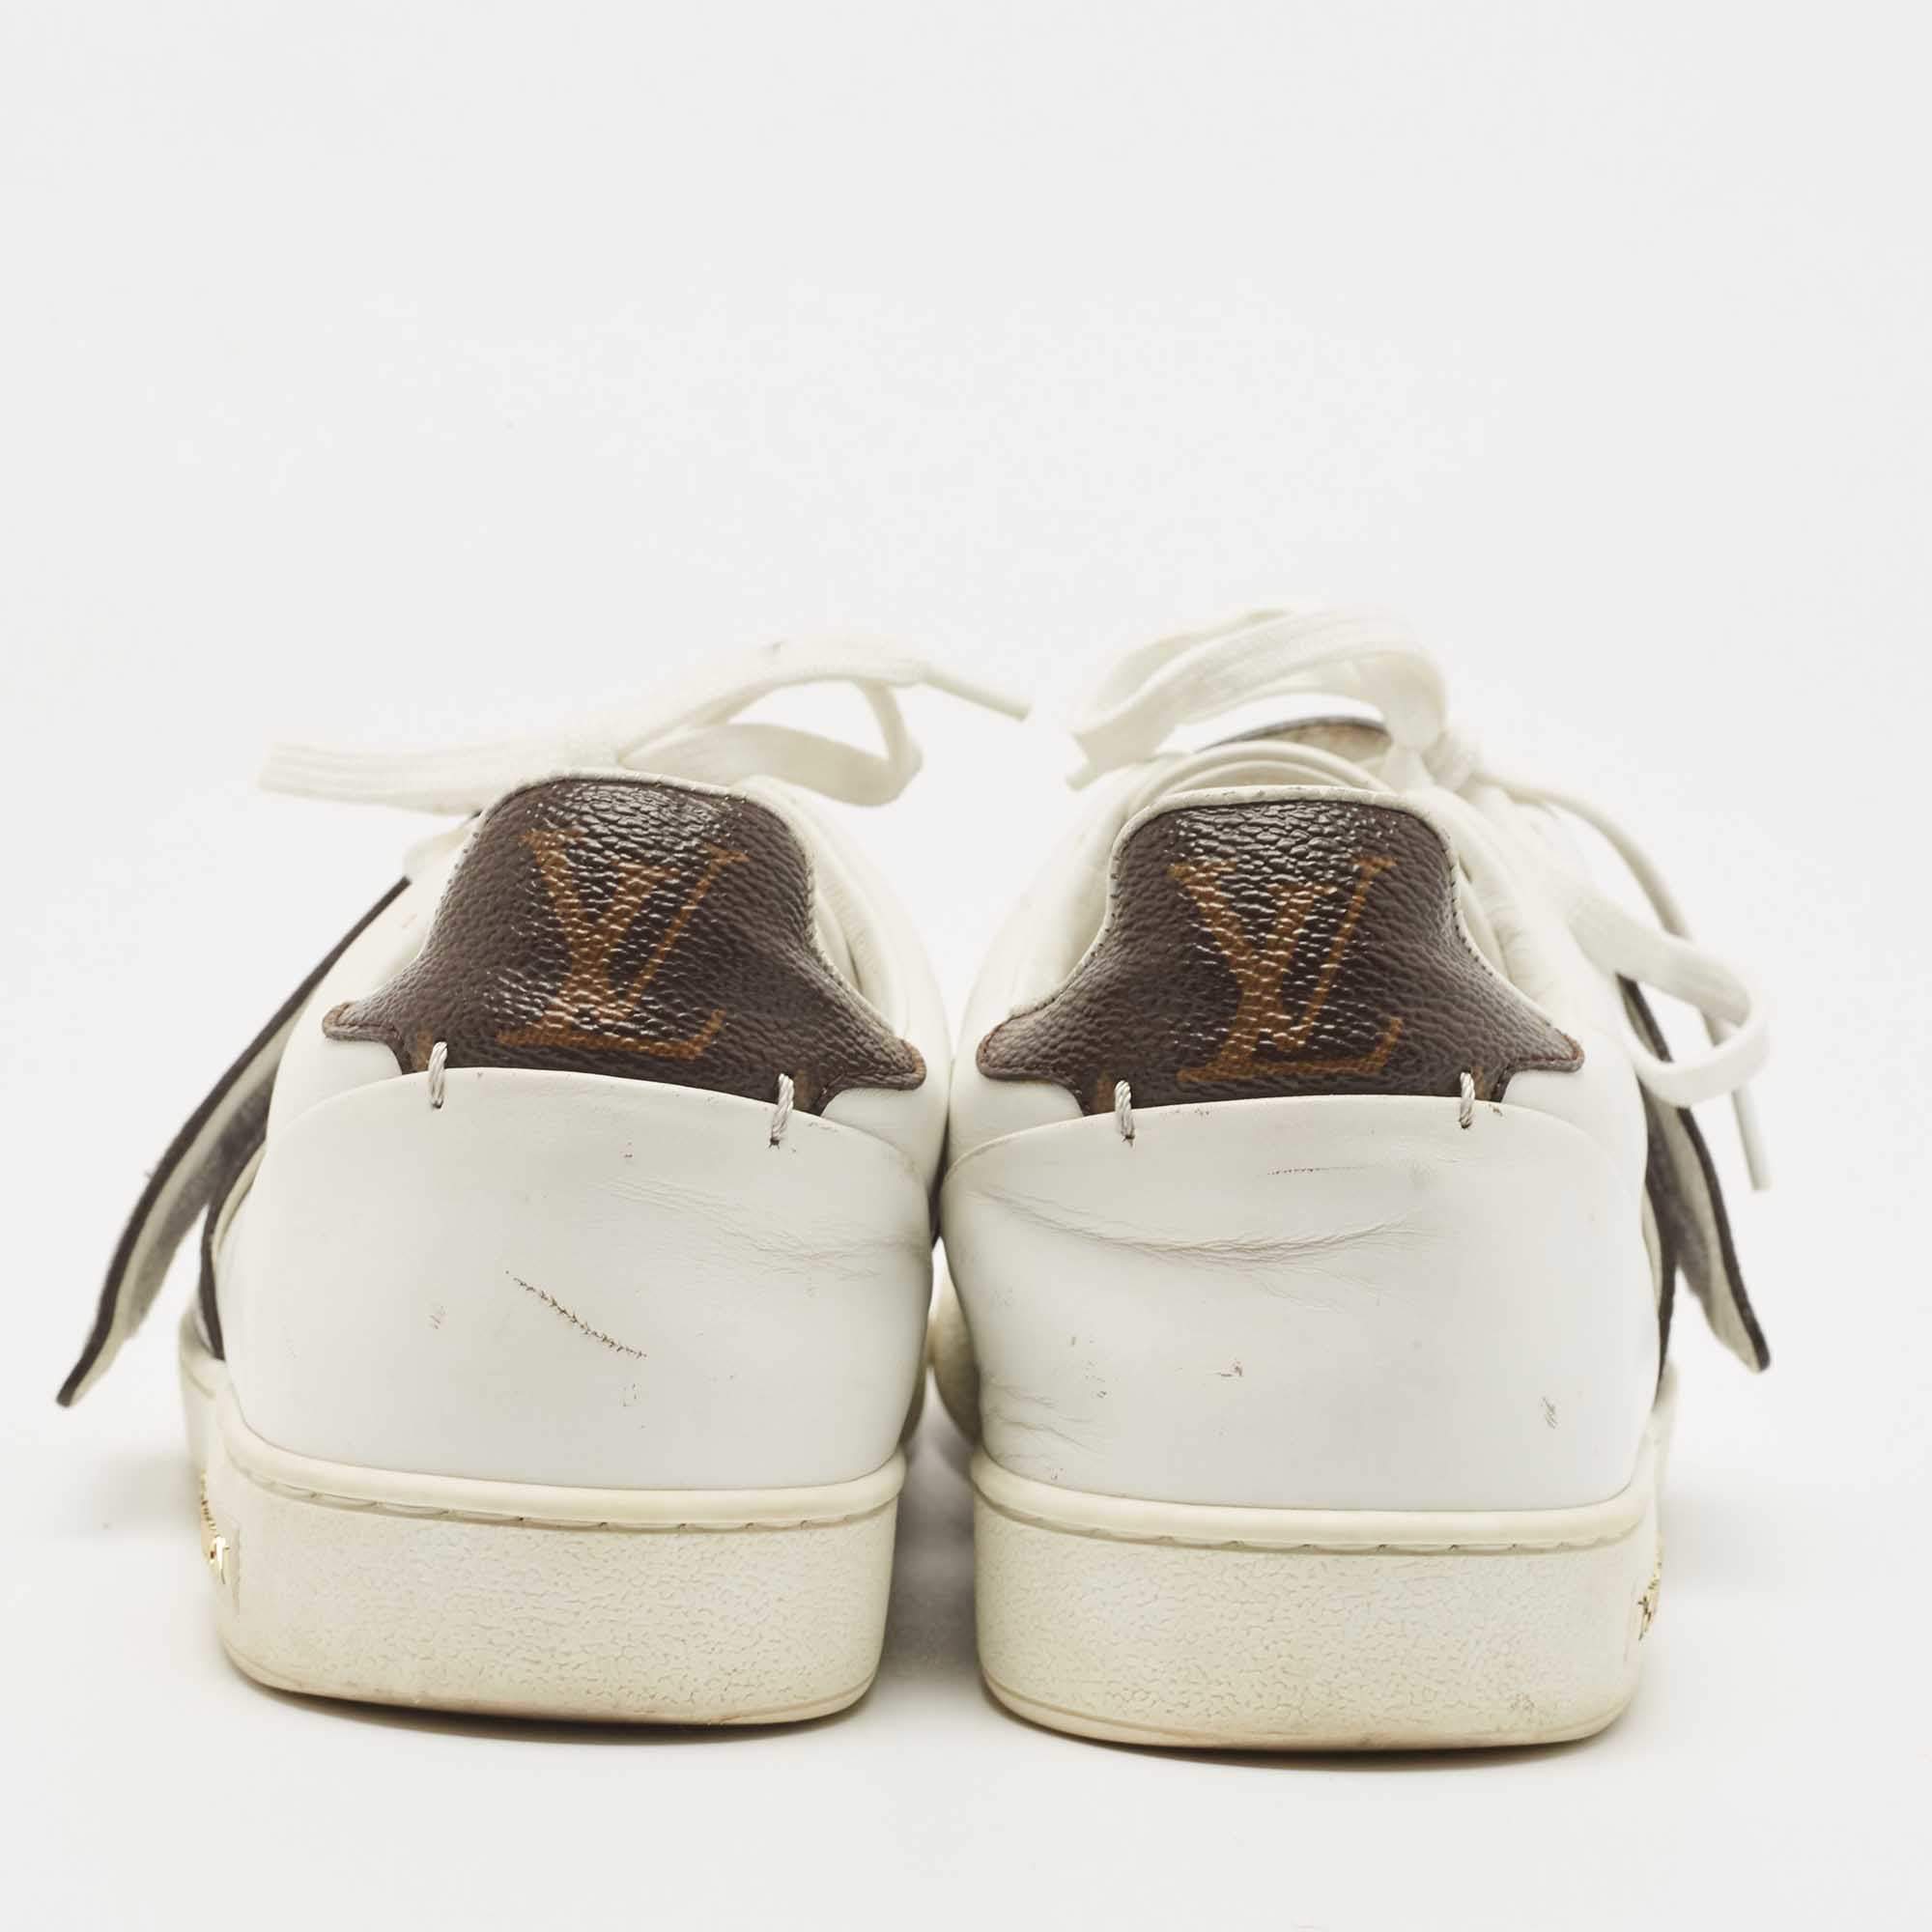 Frontrow cloth trainers Louis Vuitton Brown size 38 EU in Cloth - 20027345